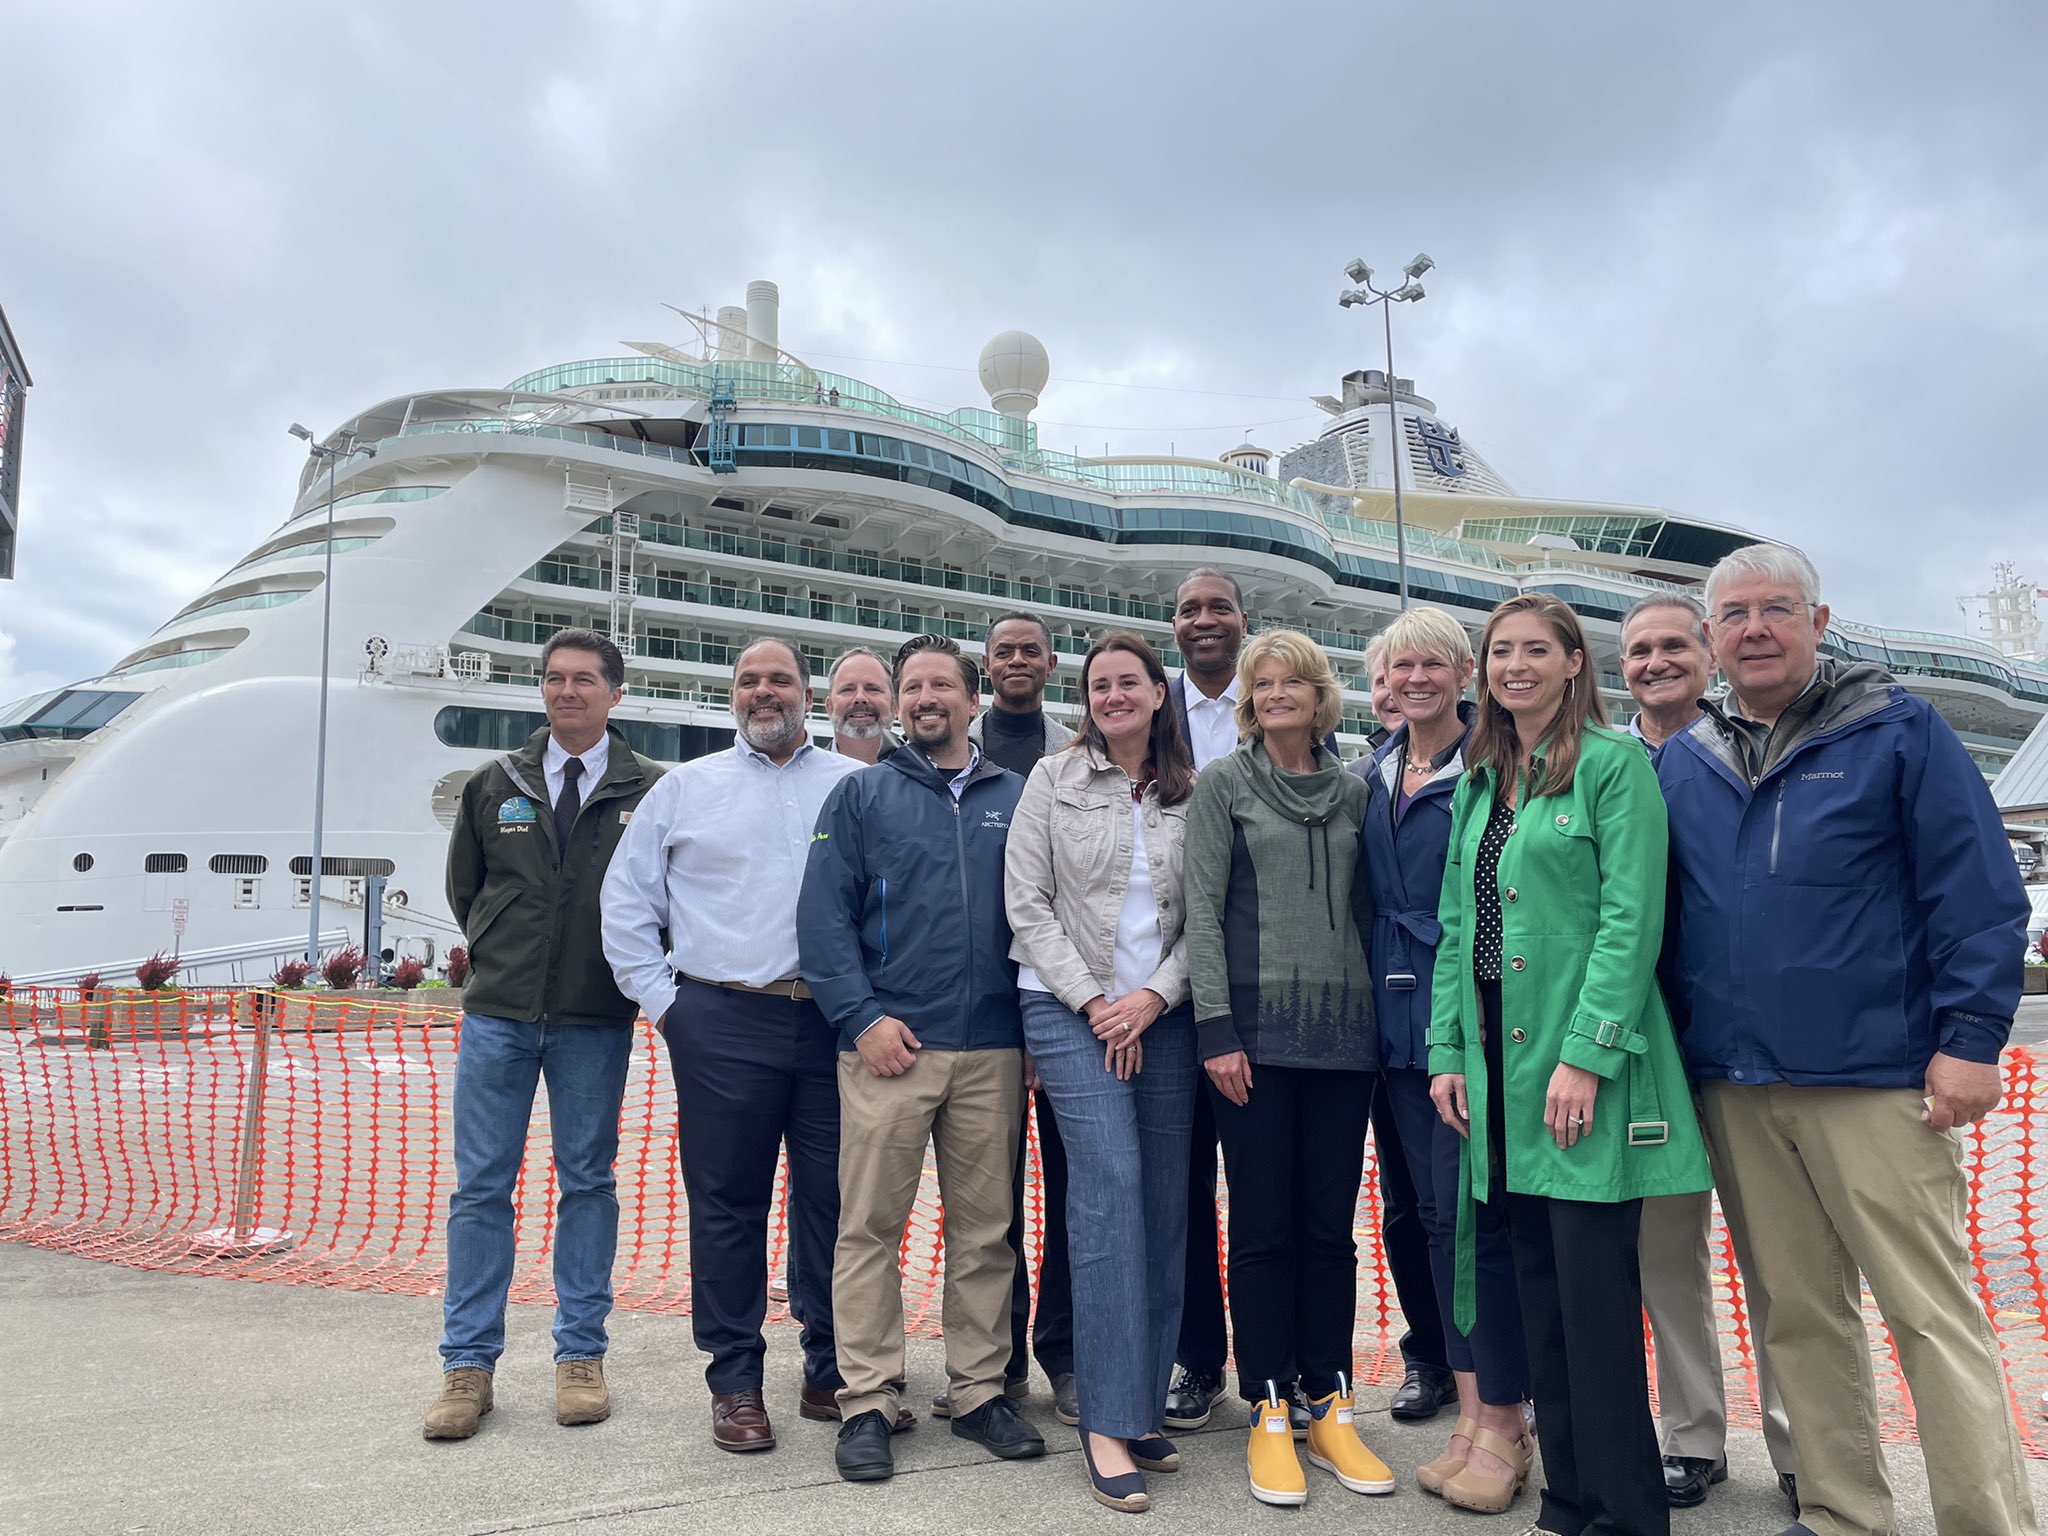 Serenade of the Seas with representatives celebrating her arrival